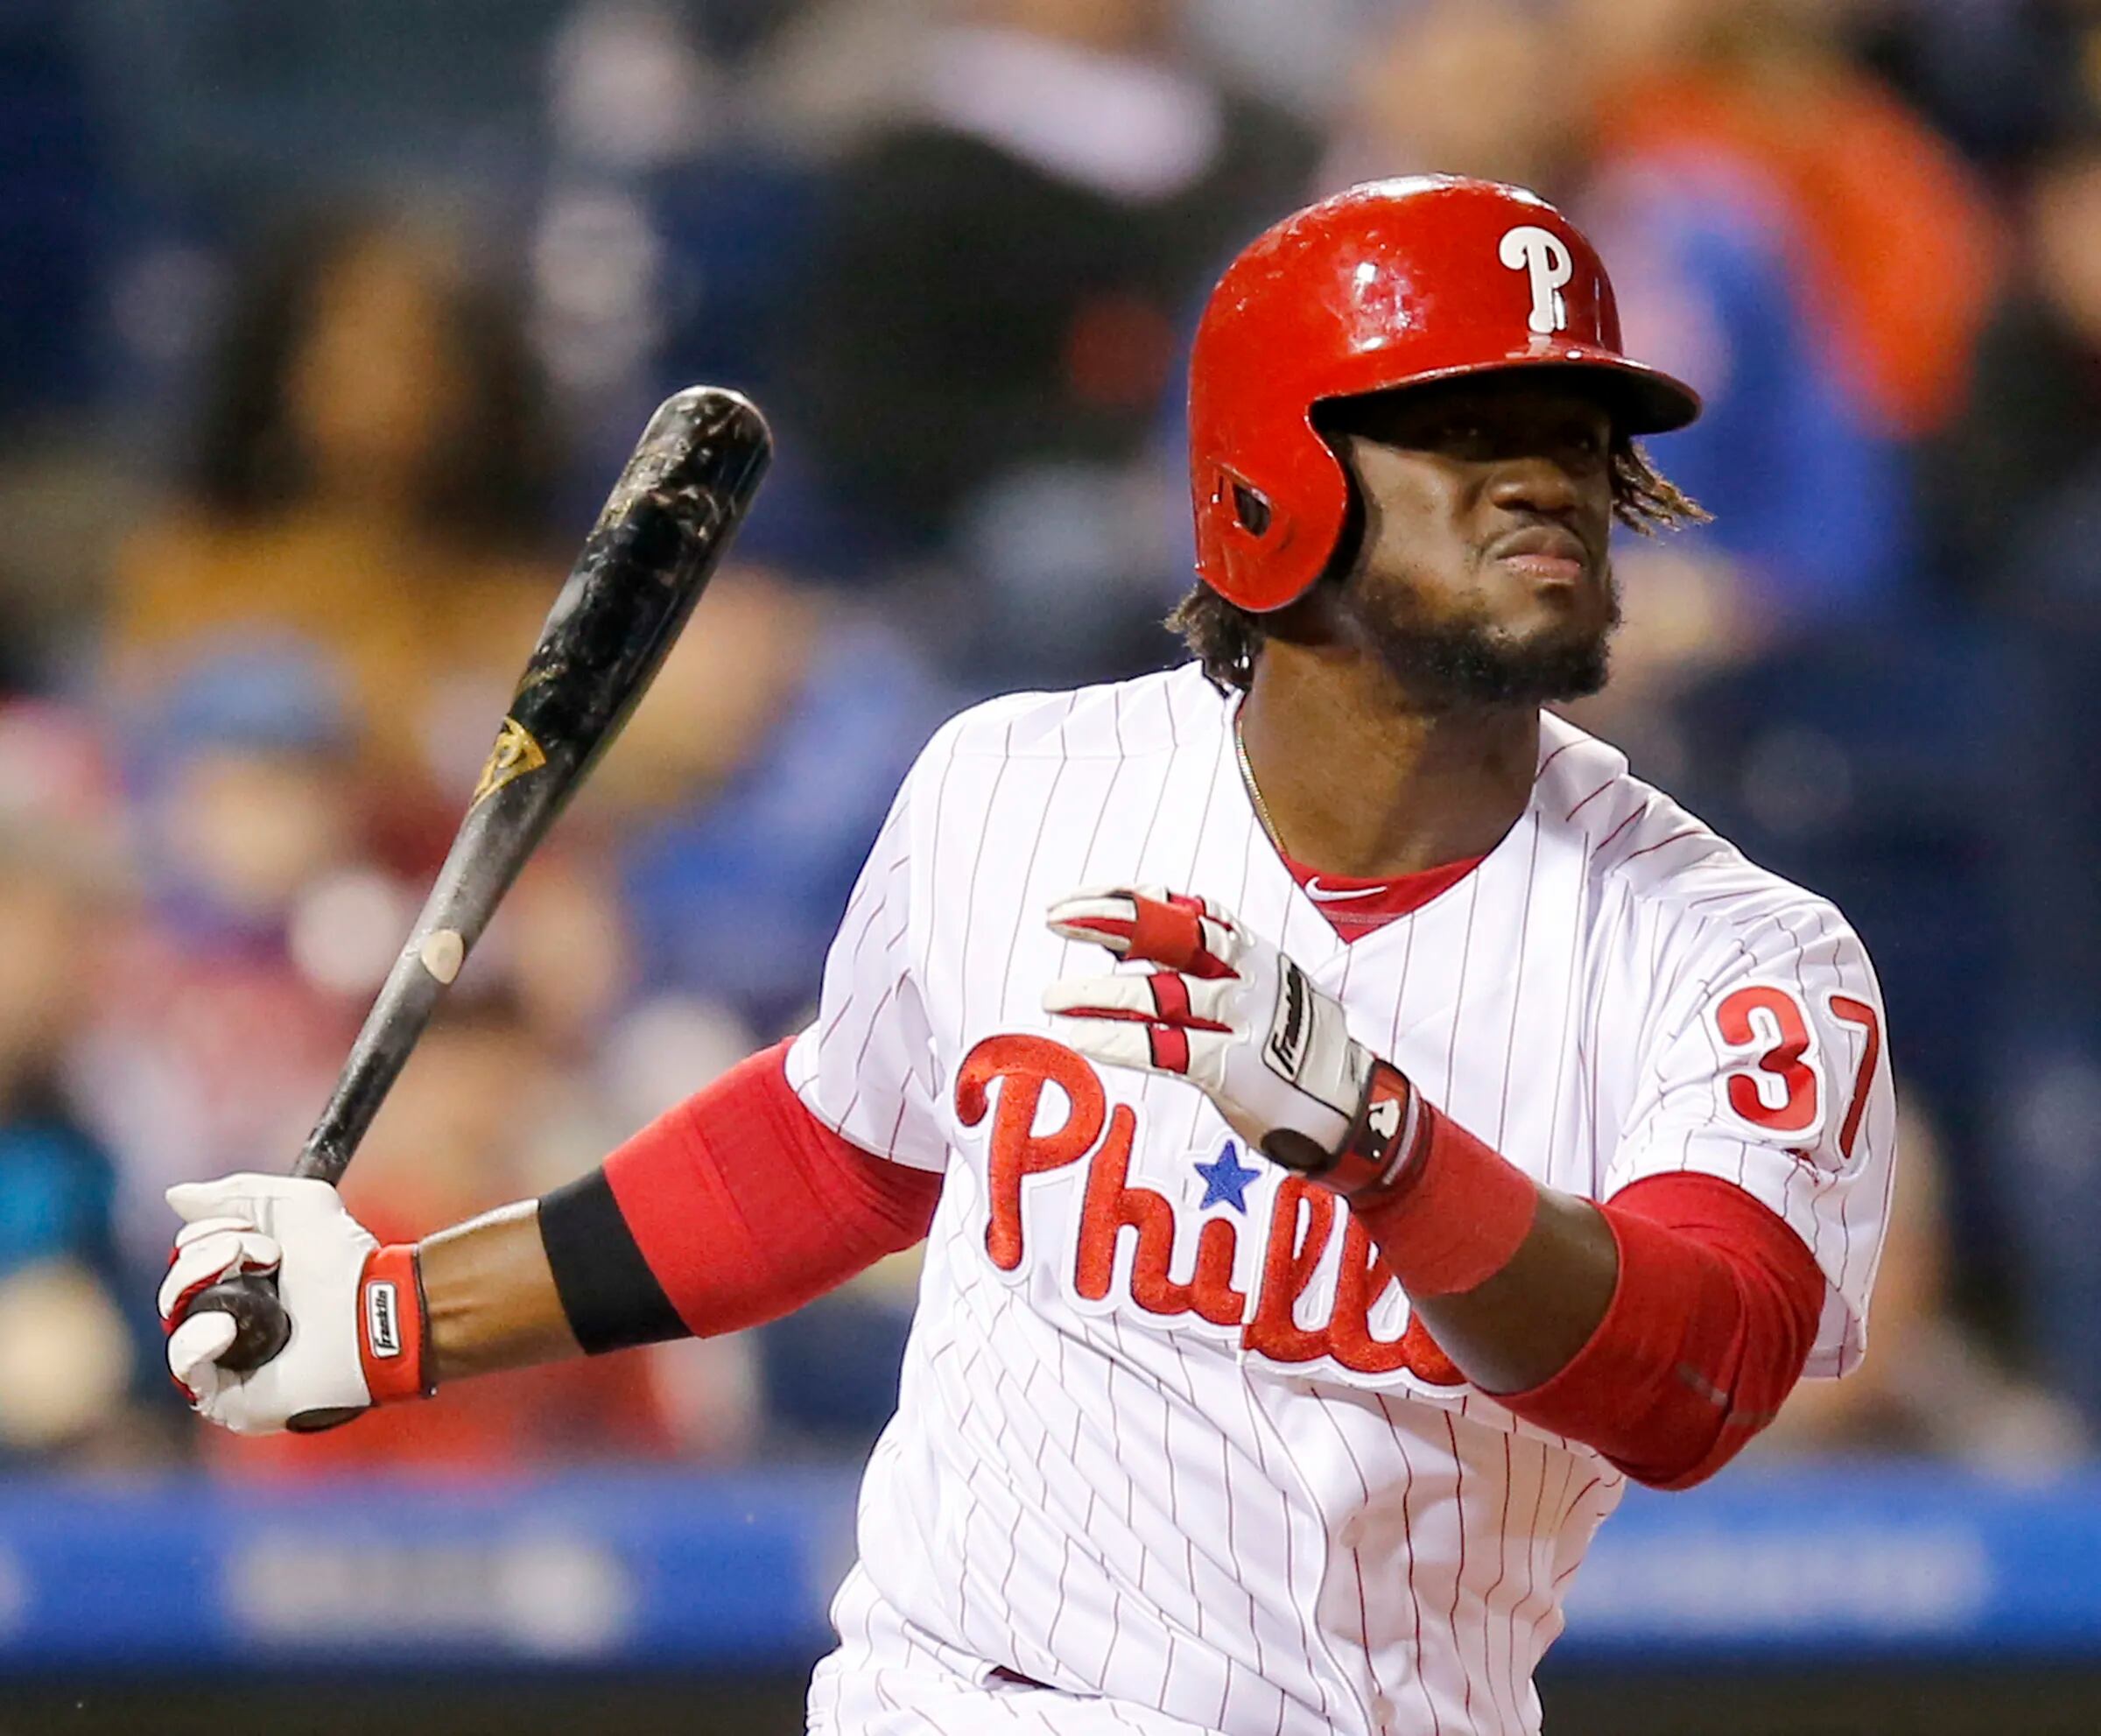 PHILLIES NOTES: Herrera needs to continue growth